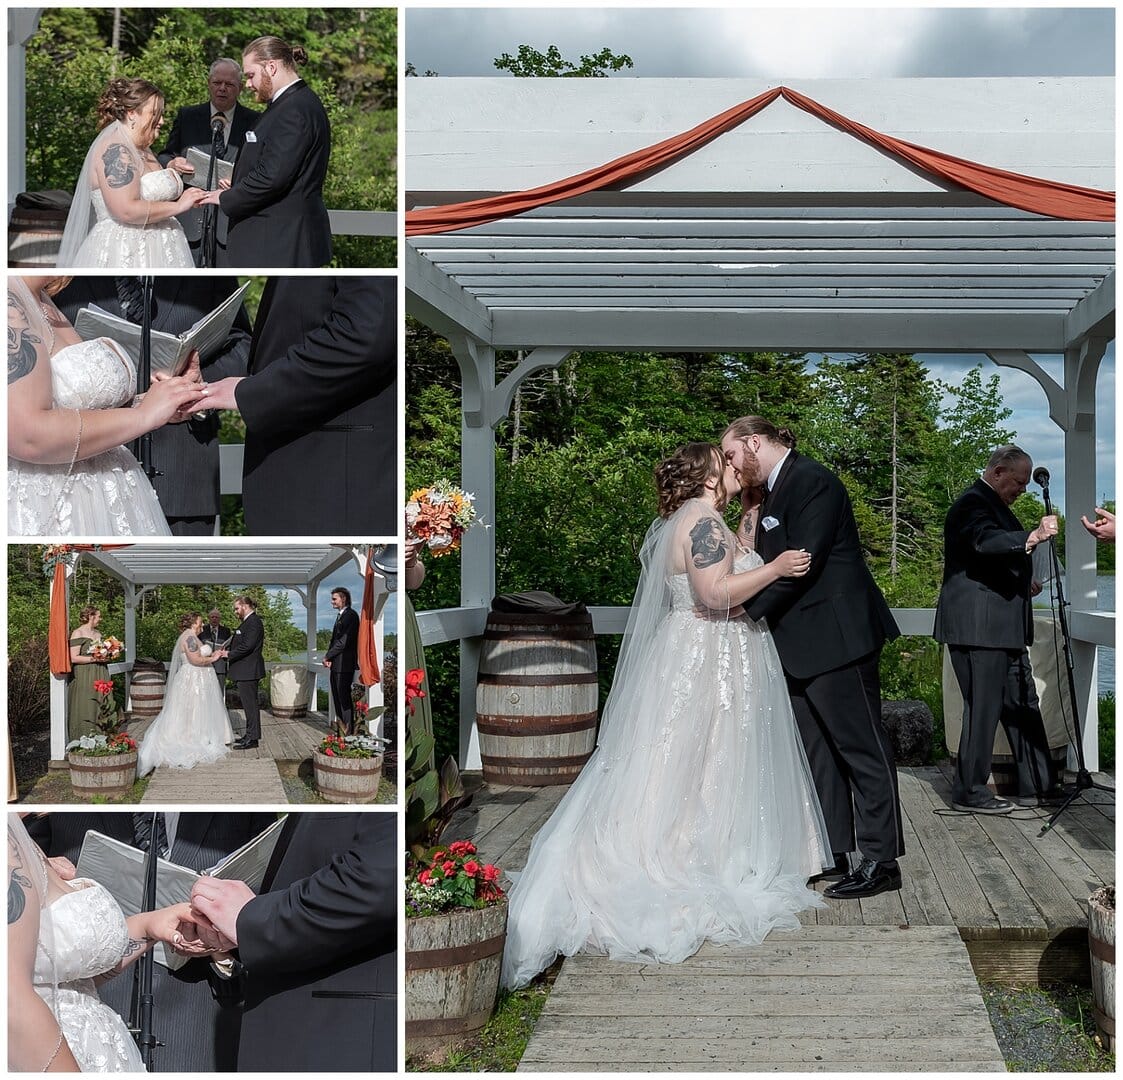 The bride and groom exchange wedding rings then their first kiss during their ceremony at Hatfield Farm in Halifax, NS.